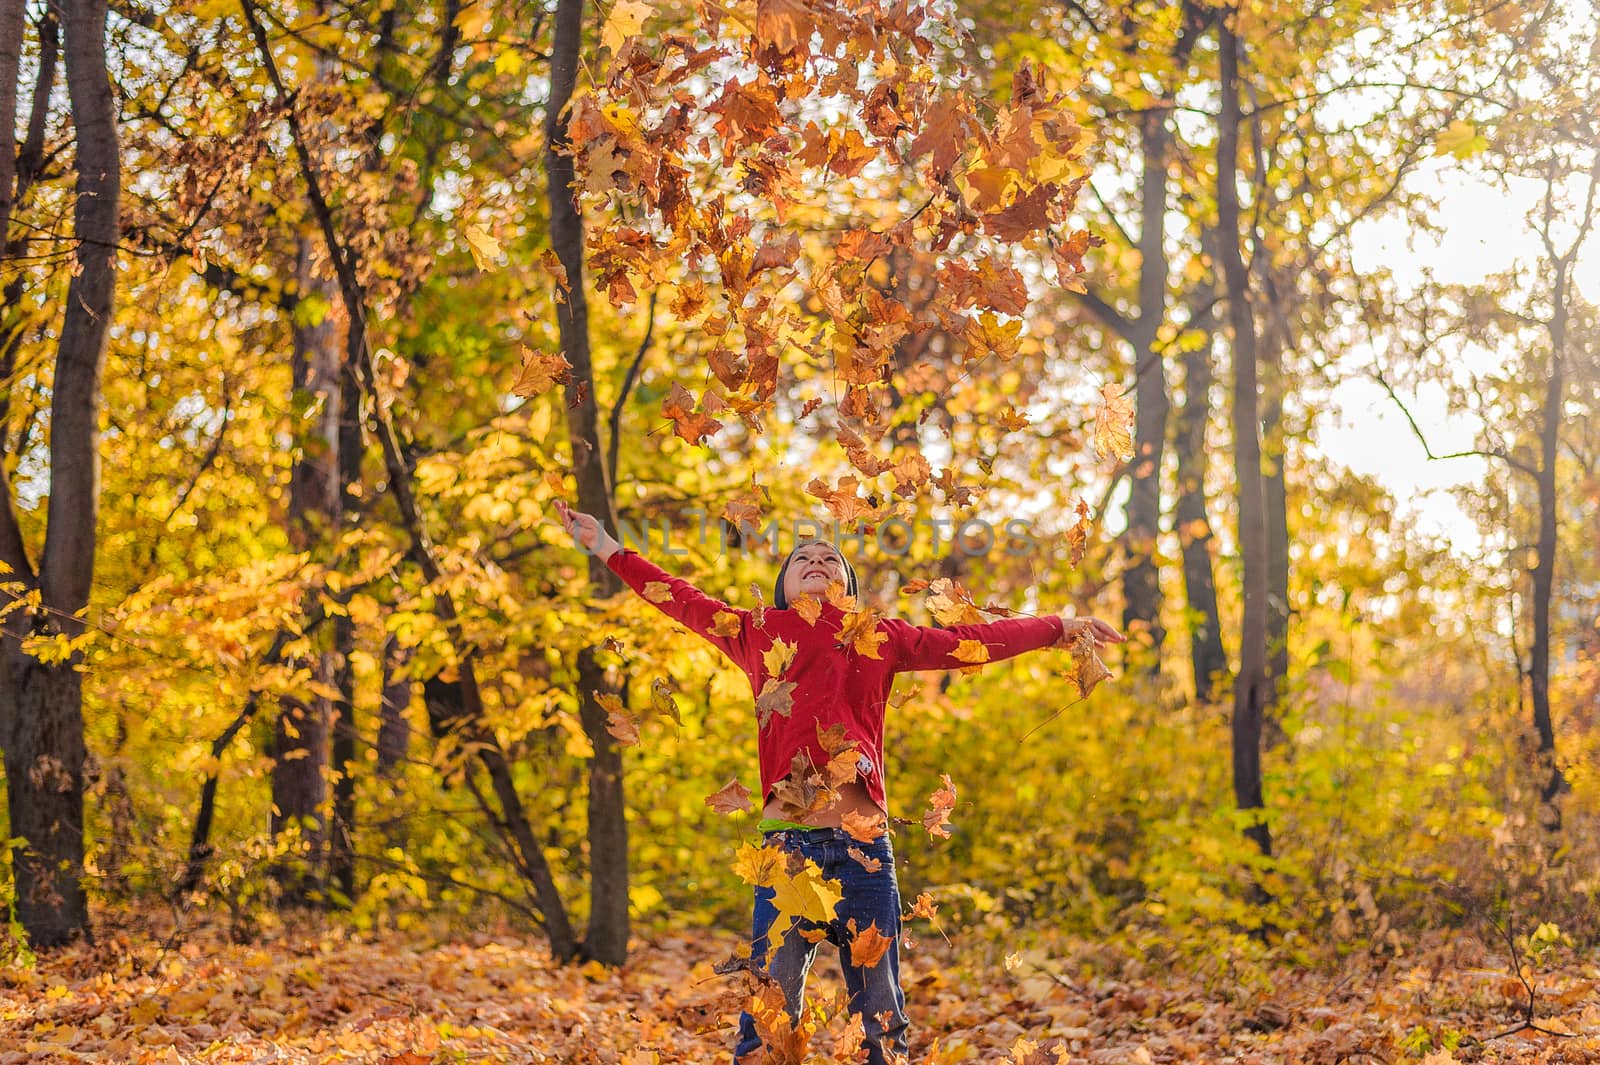 happy boy in a red sweater throws up an armful of yellow leaves in the autumn forest by chernobrovin